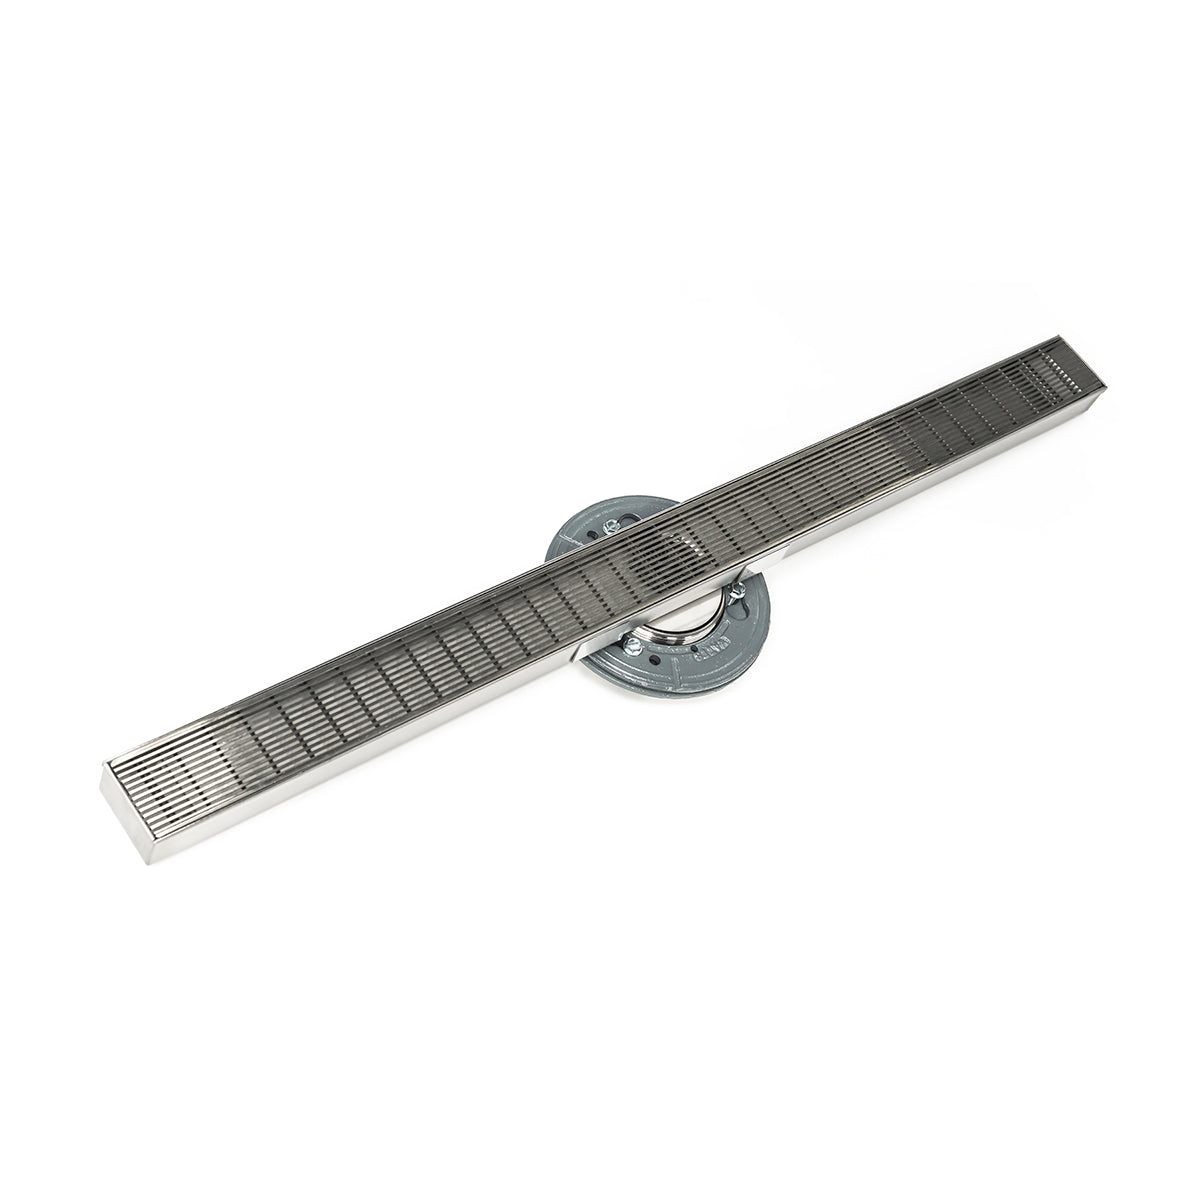 Infinity Drain 72" S-Stainless Steel Series High Flow Site Sizable Linear Drain Kit with 2 1/2" Wedge Wire Grate with PVC Drain Body, 3" Outlet